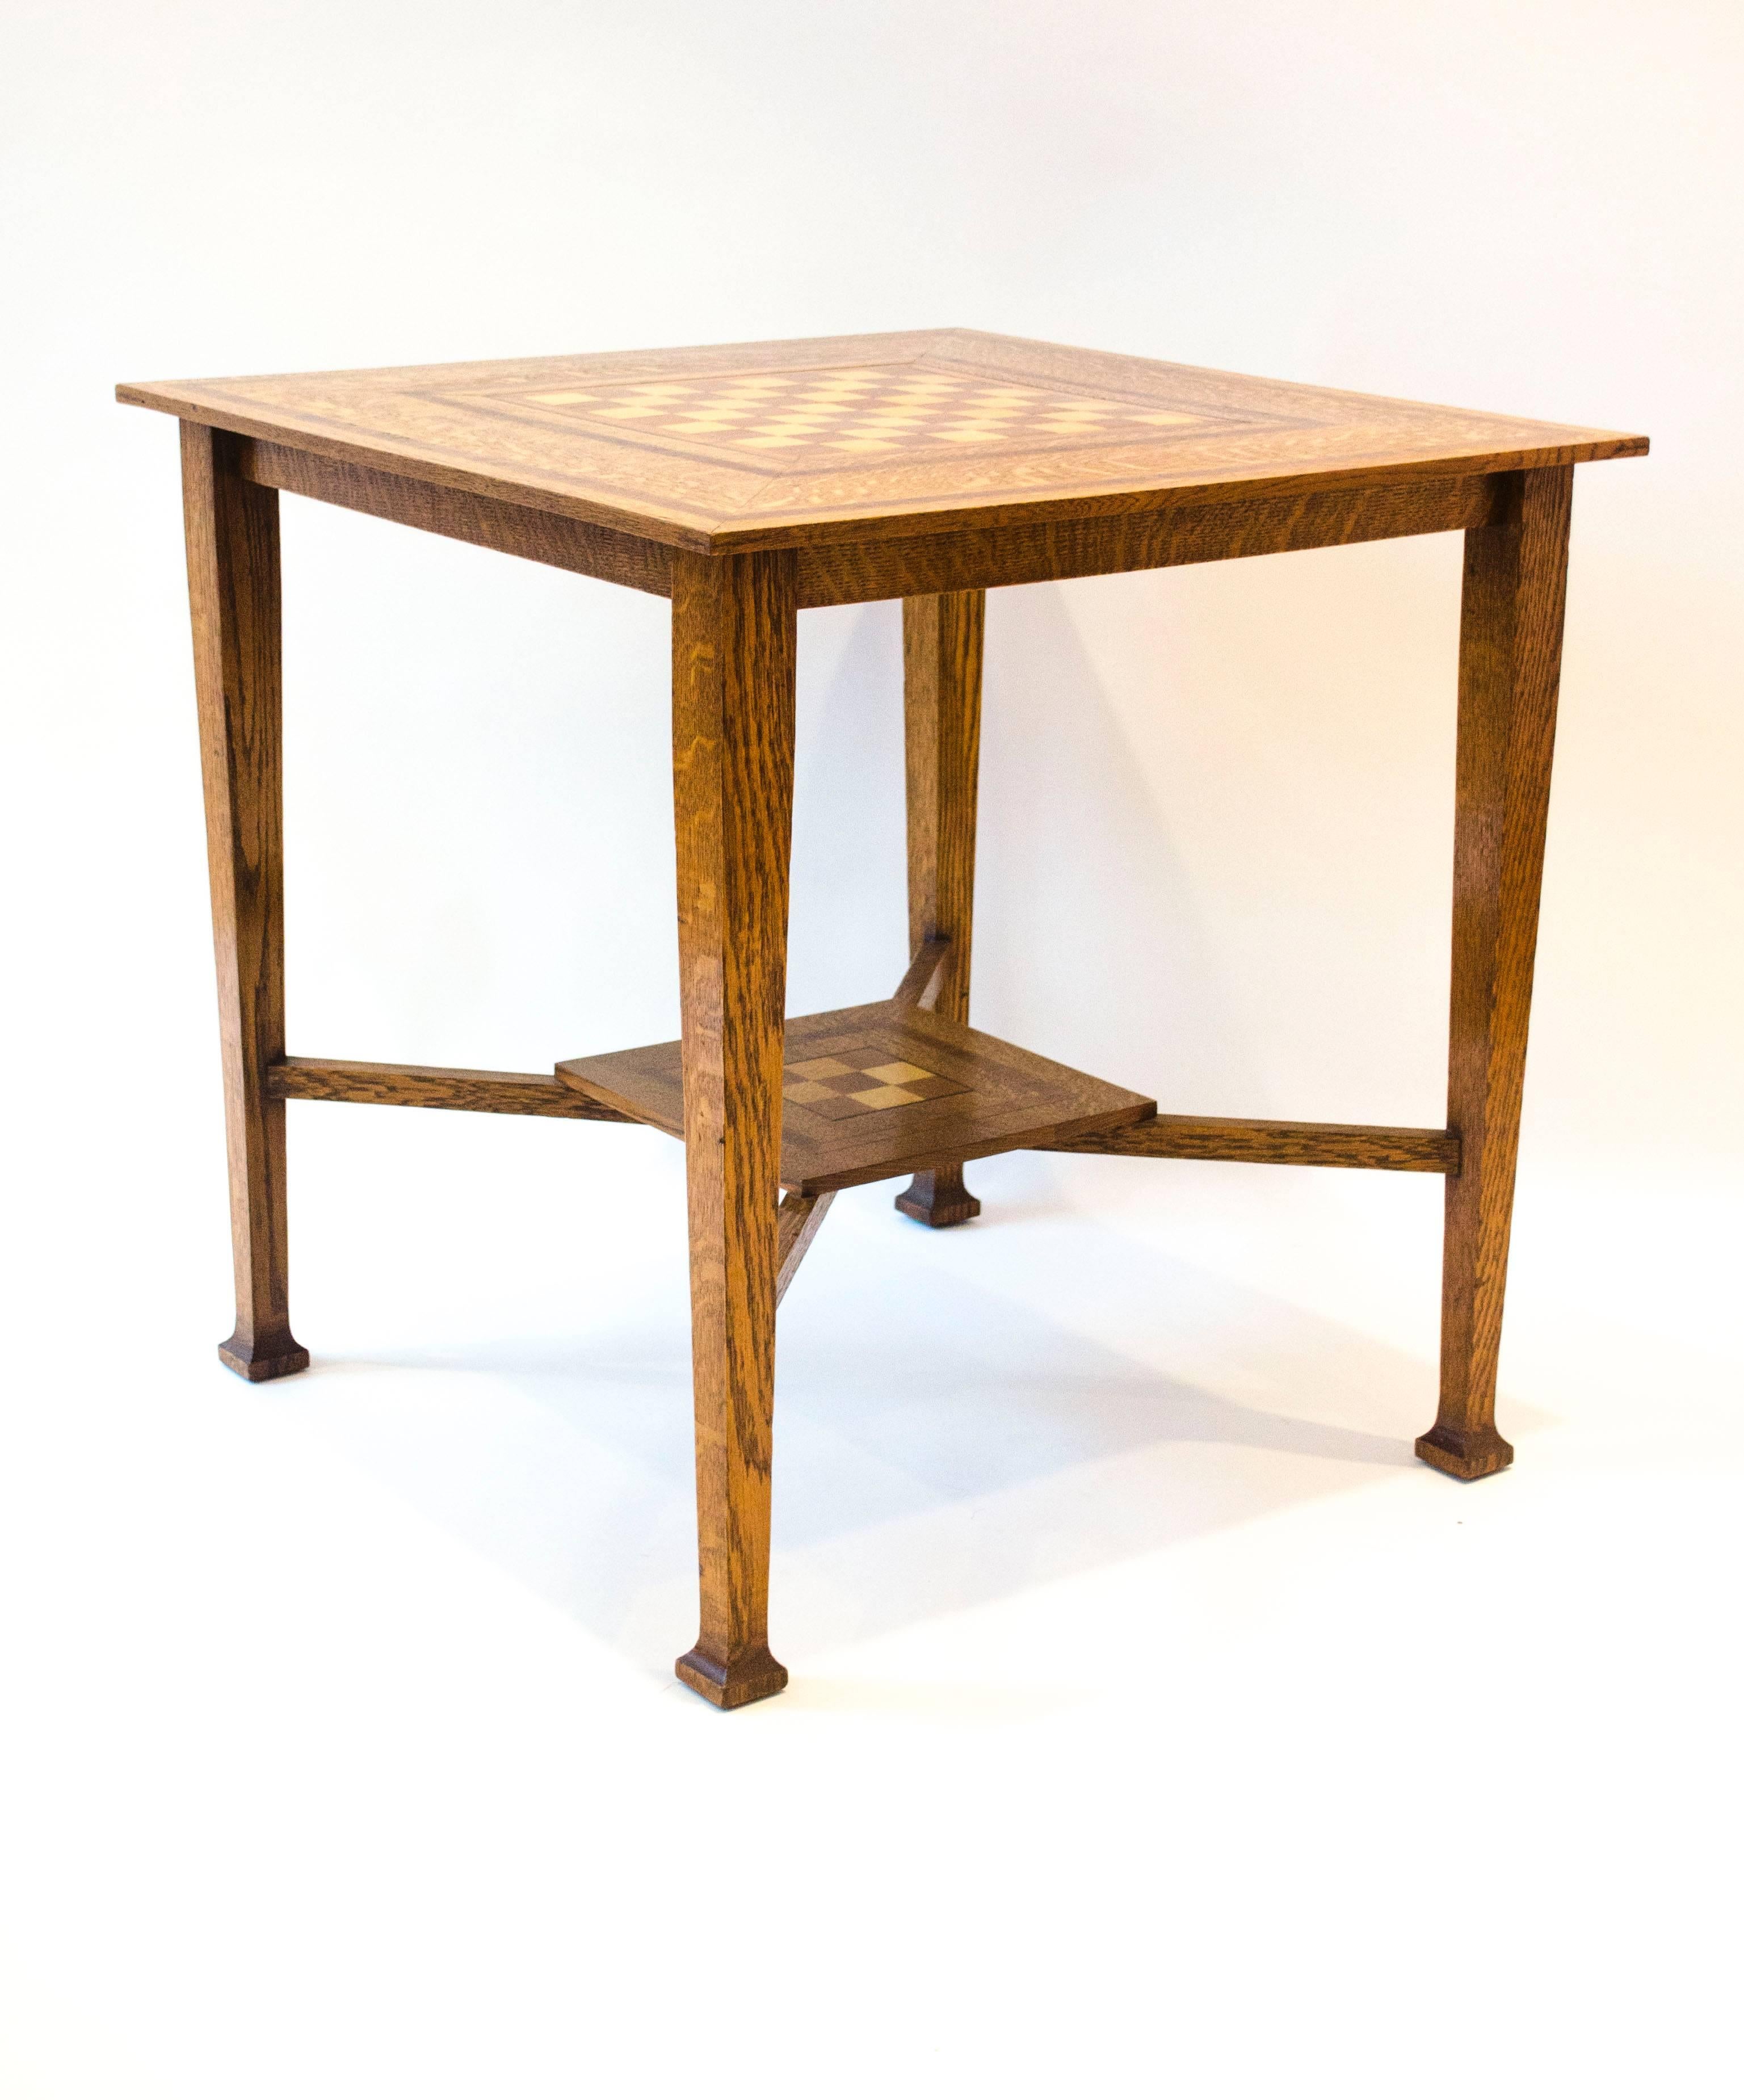 Liberty & Co attributed, A good Arts & Crafts 1/4 sawn oak chess table with alternating burr sycamore and walnut squares to the top surrounded with mahogany and ebony banding with further rosewood cross banding, edged with boxwood stringing, on